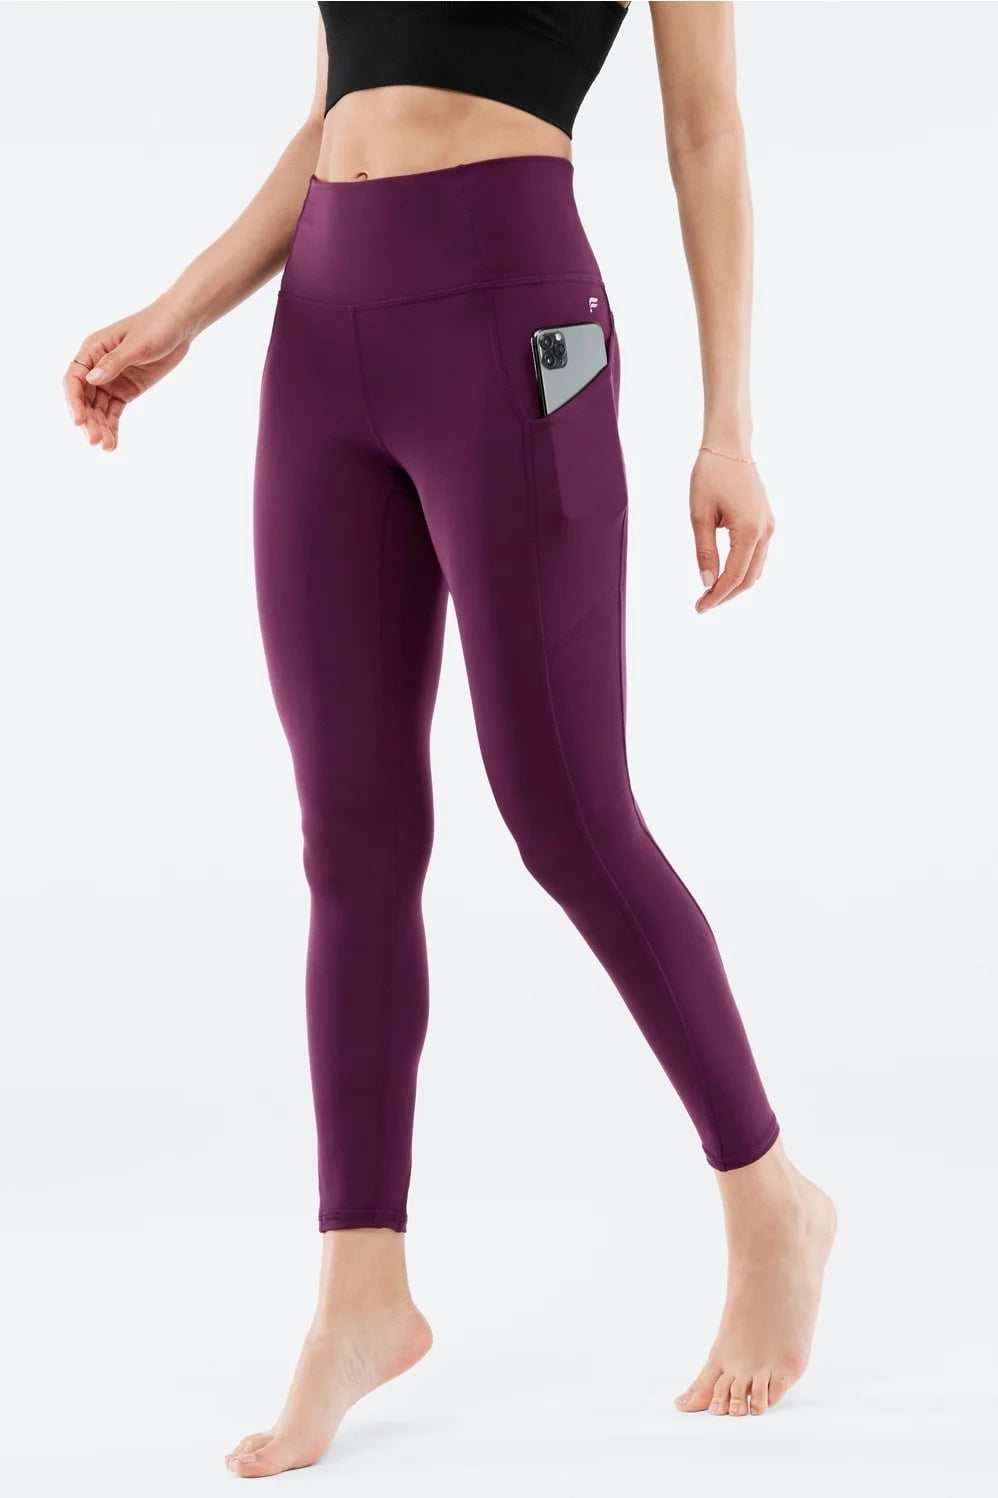 Fabletics Oasis PureLuxe High-Waisted 7/8 Legging Size Small: S/Burgundy 